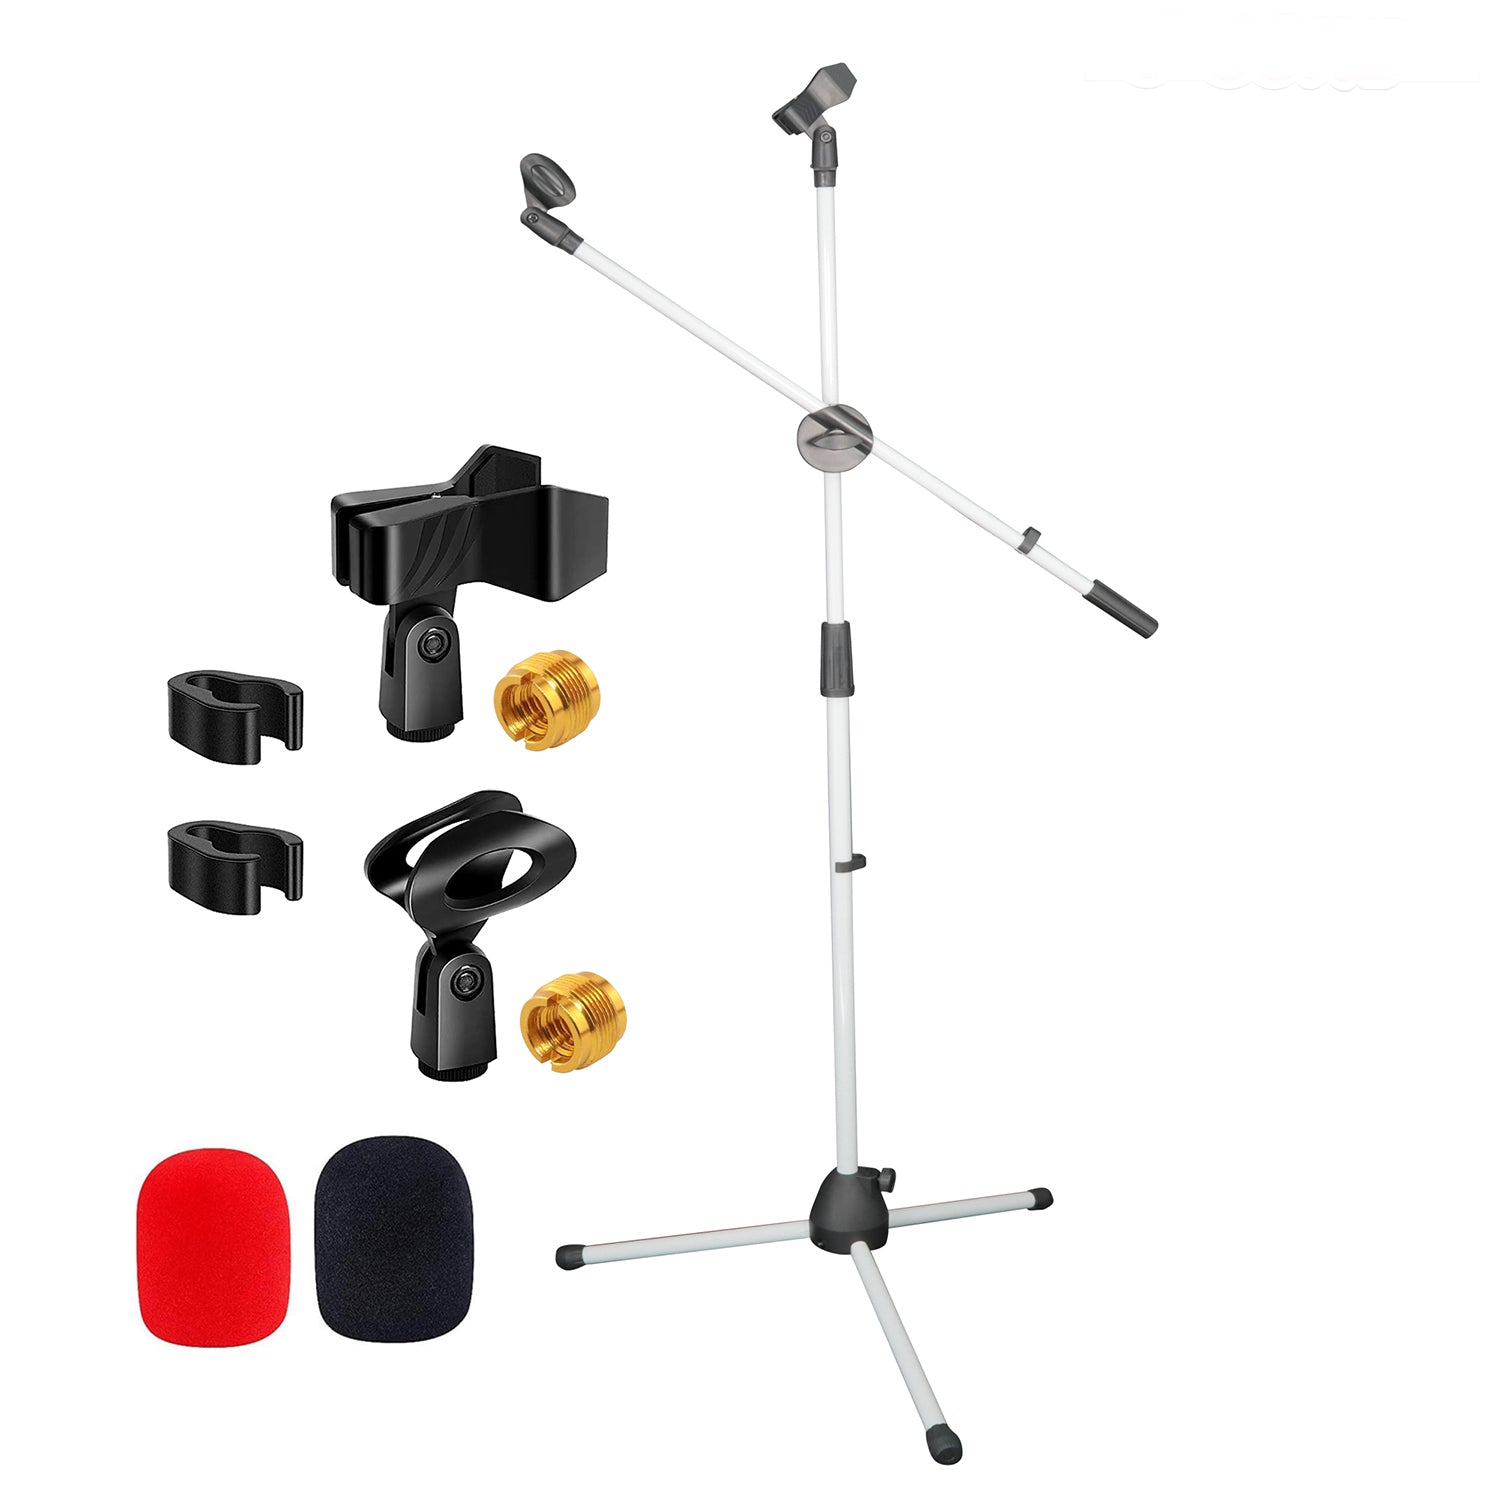 5Core Tripod Mic Stand Height Adjustable Universal Microphone Mount Floor Stands w Boom 1/2/4 Pc